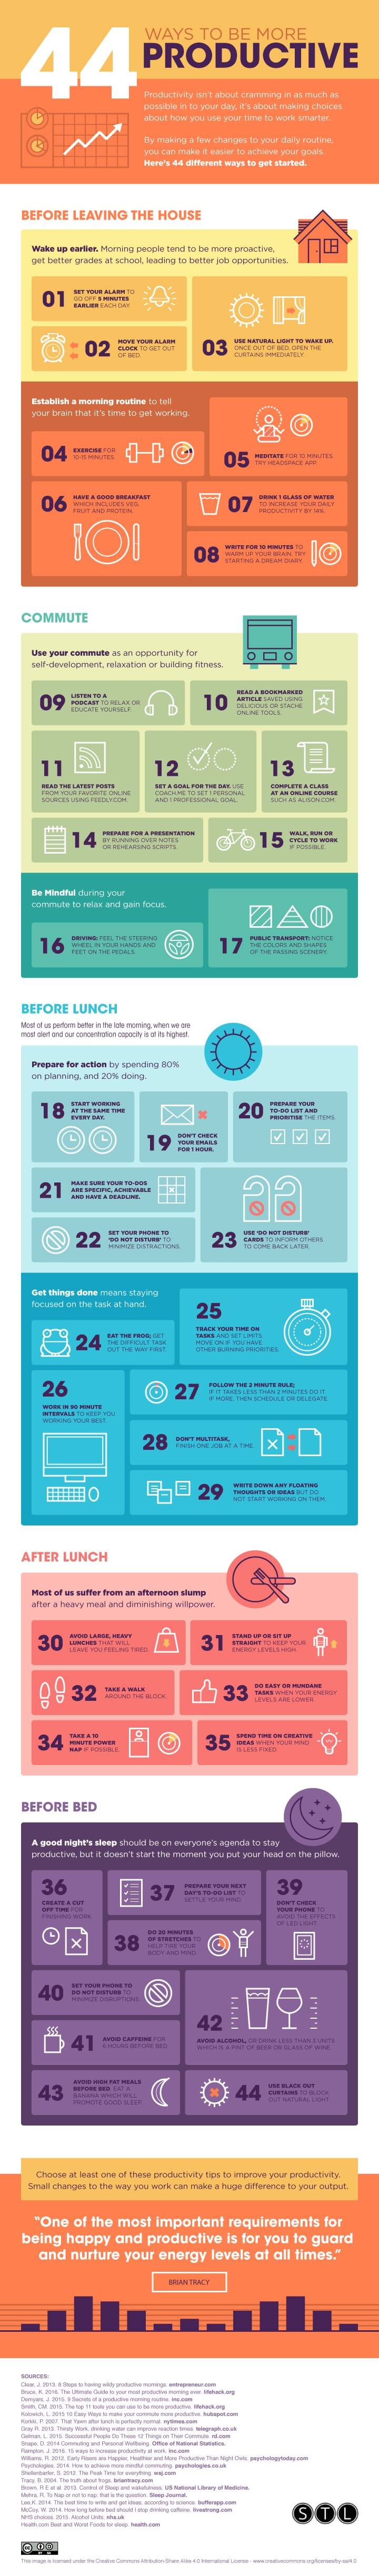 44 ways to be more productive